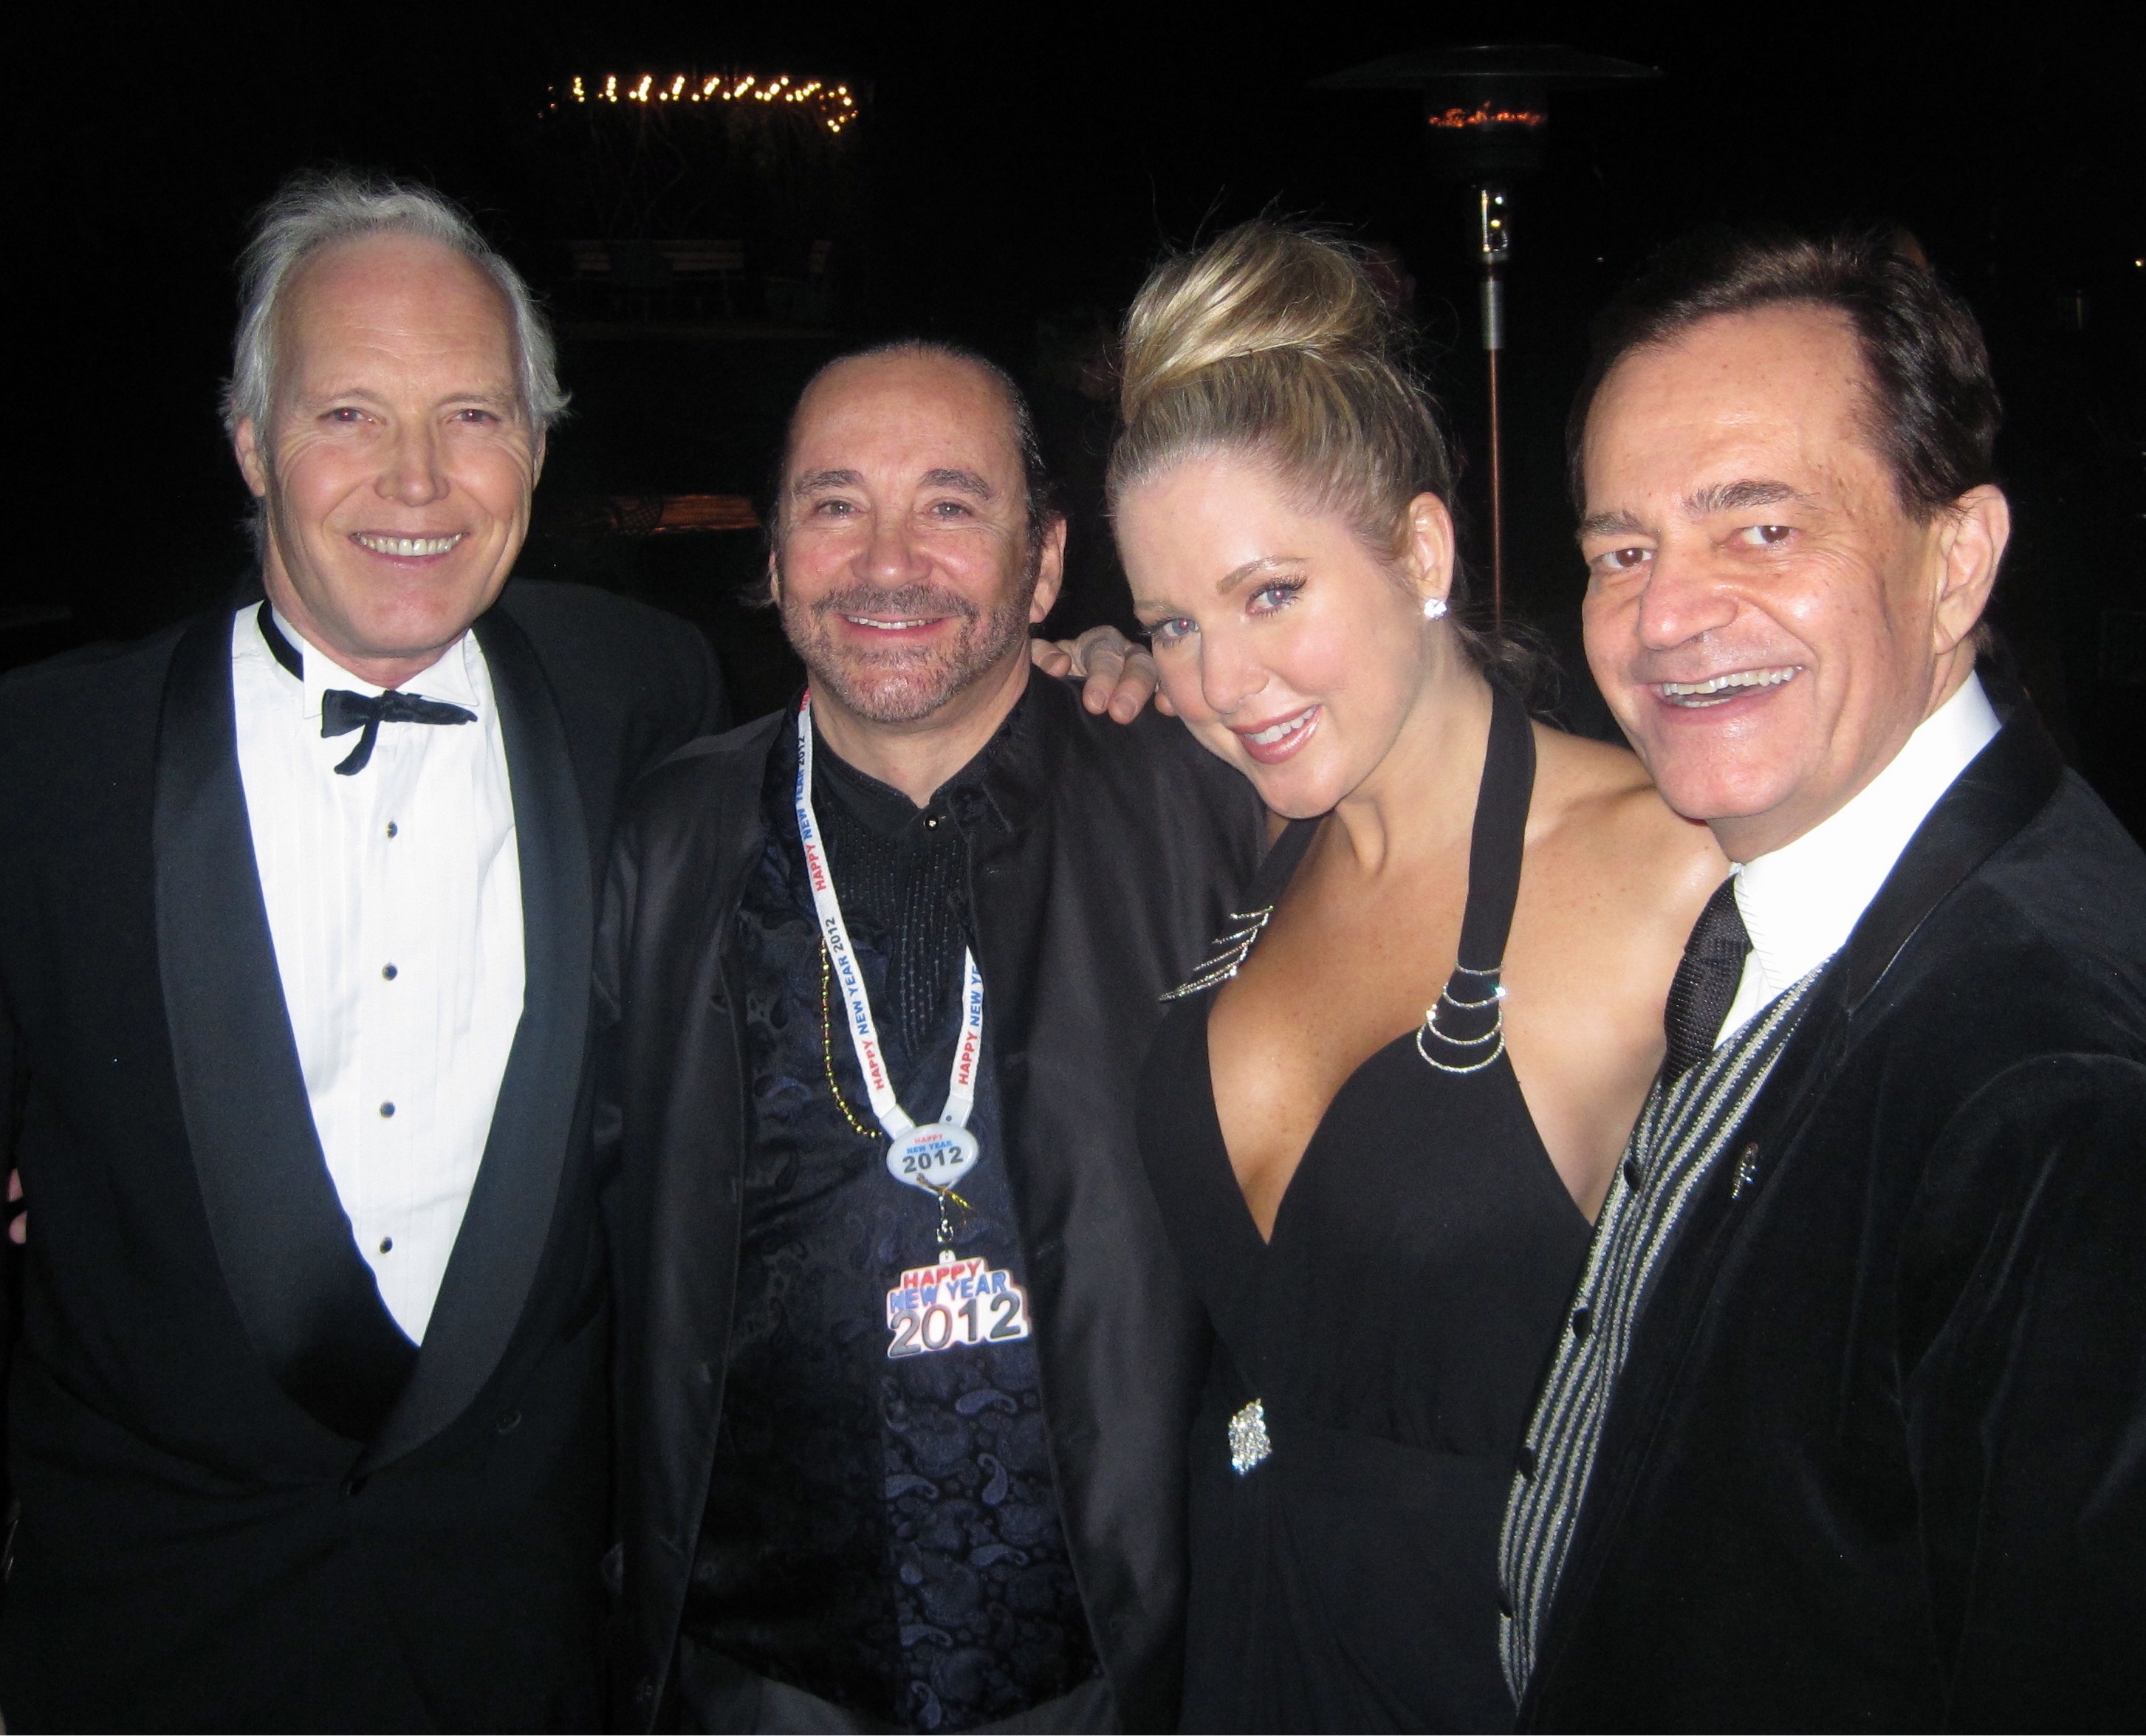 Actress Tammy Barr at the event of Prince Rudolf Kniase Melikoff's NYE Gala. Arrivals in Beverly Hills, Ca on December 31, 2011